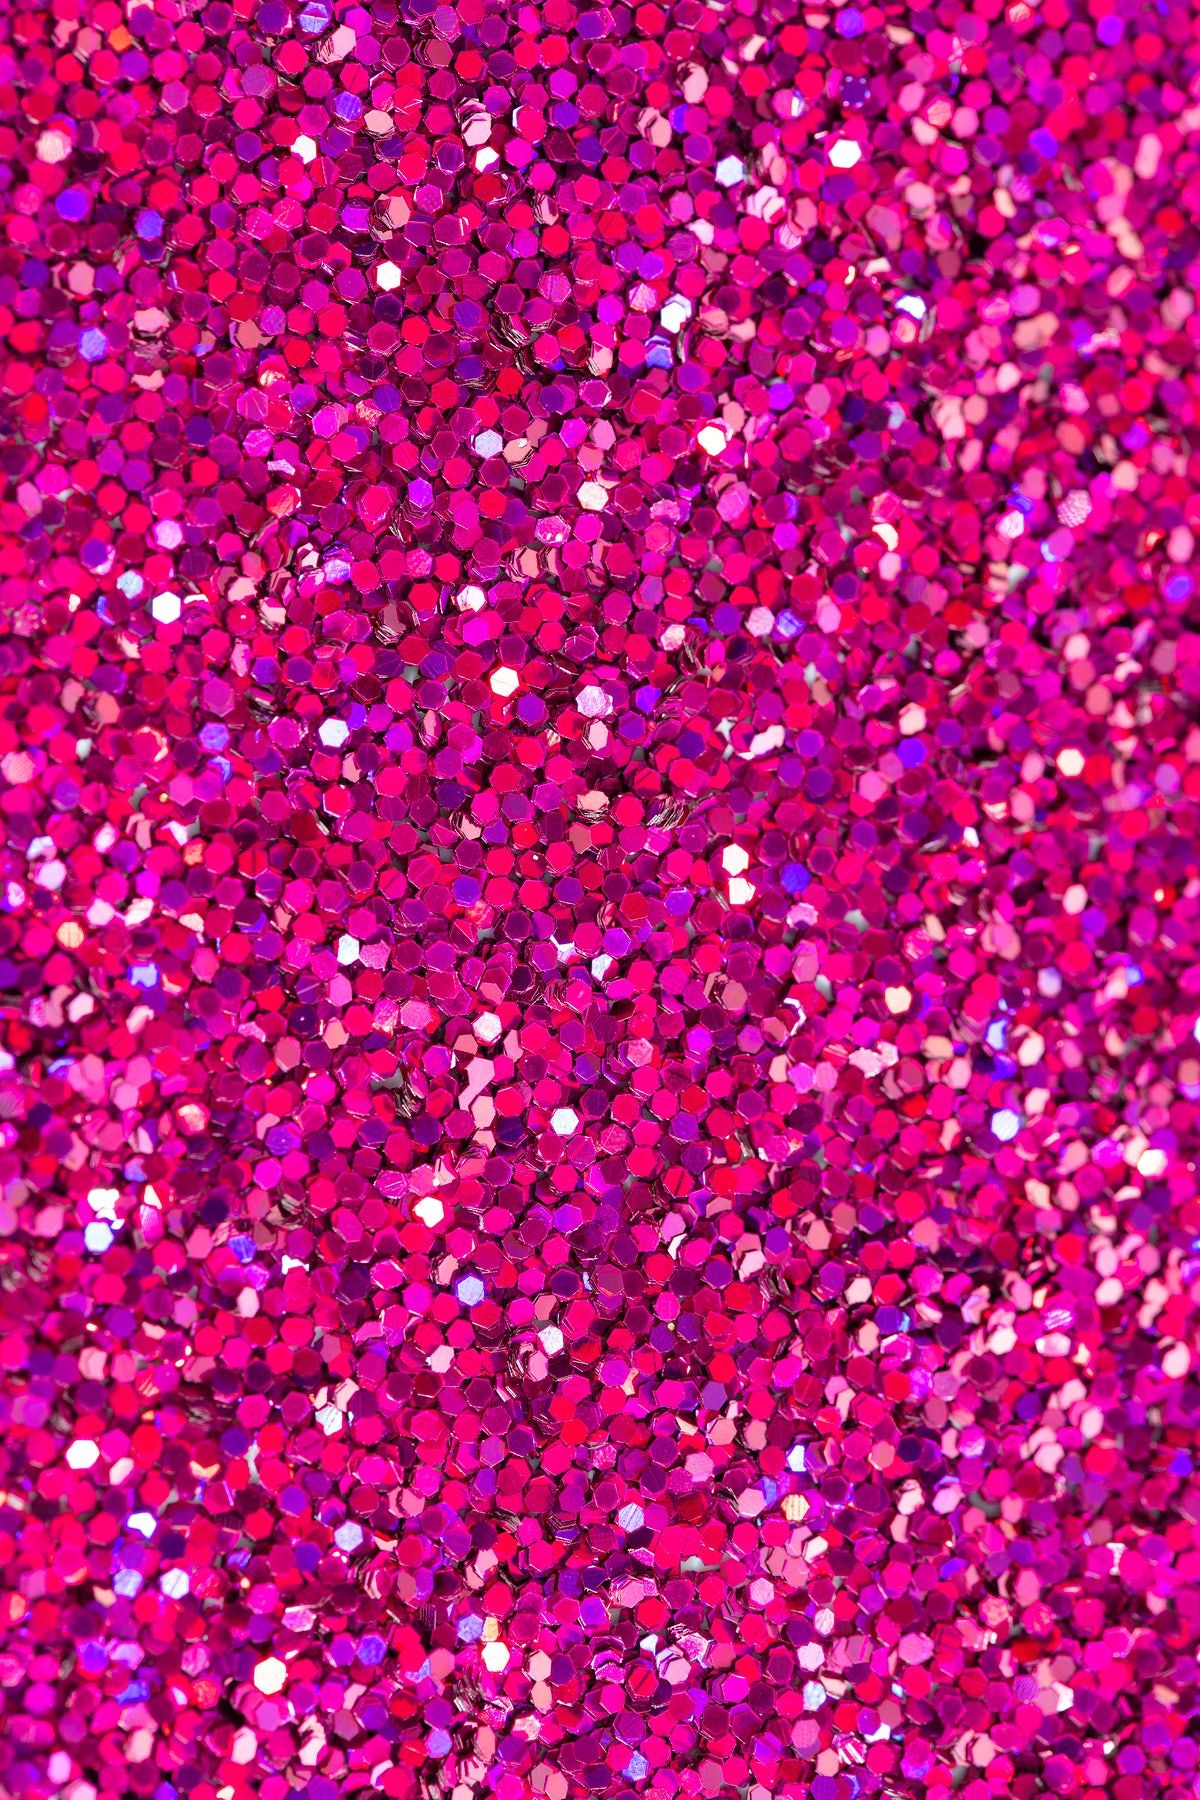 Download free image of Shiny pink glitter textured background by Teddy about glitter tex. Pink glitter background, Pink sparkle background, Pink glitter wallpaper